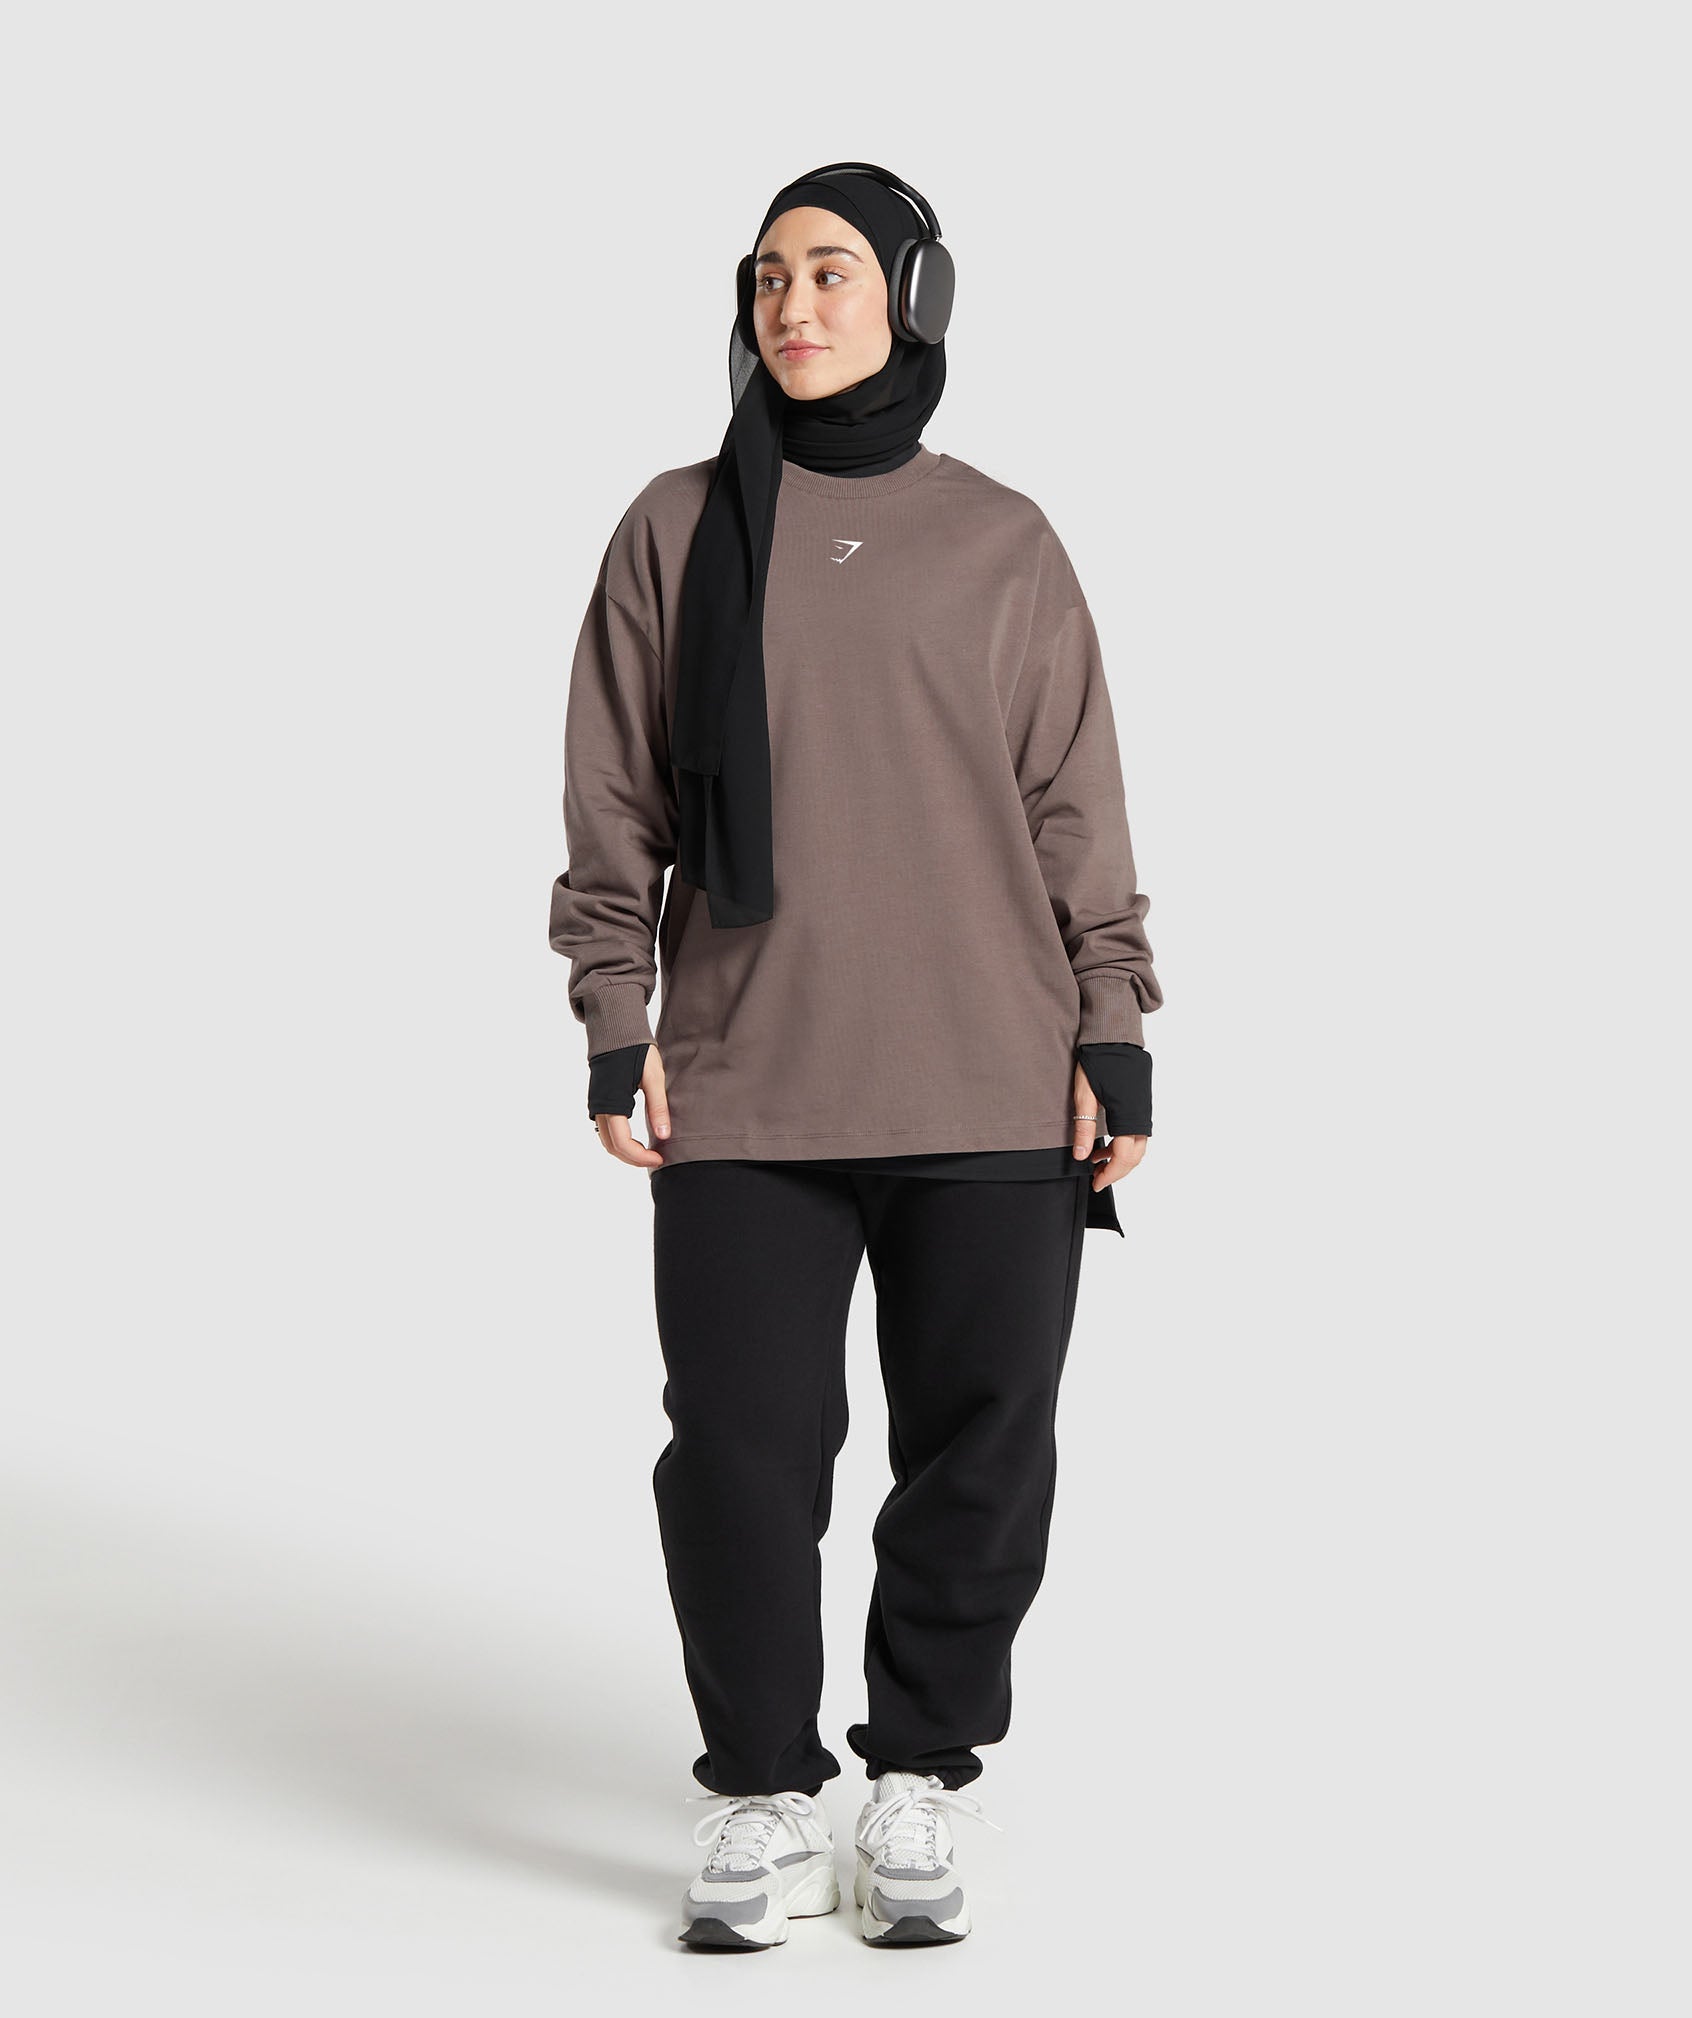 GS X Leana Deeb Graphic Oversized Long Sleeve Top in Dusty Brown - view 4